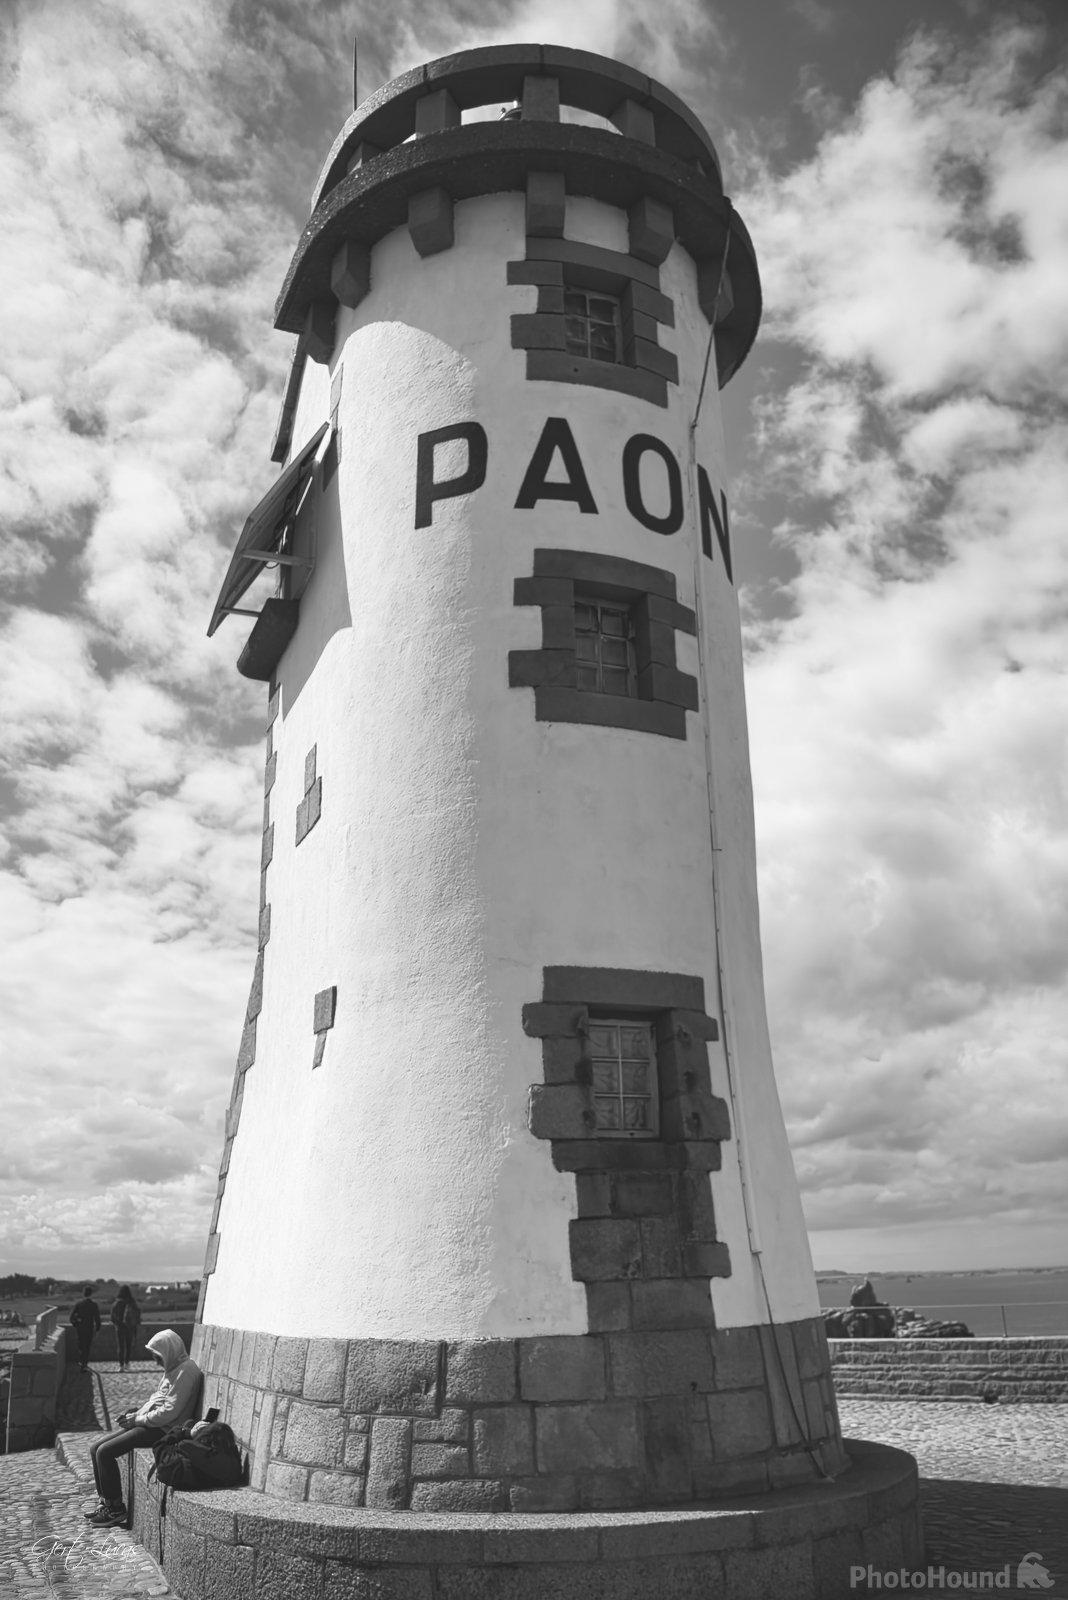 Image of Paon lighthouse by Gert Lucas